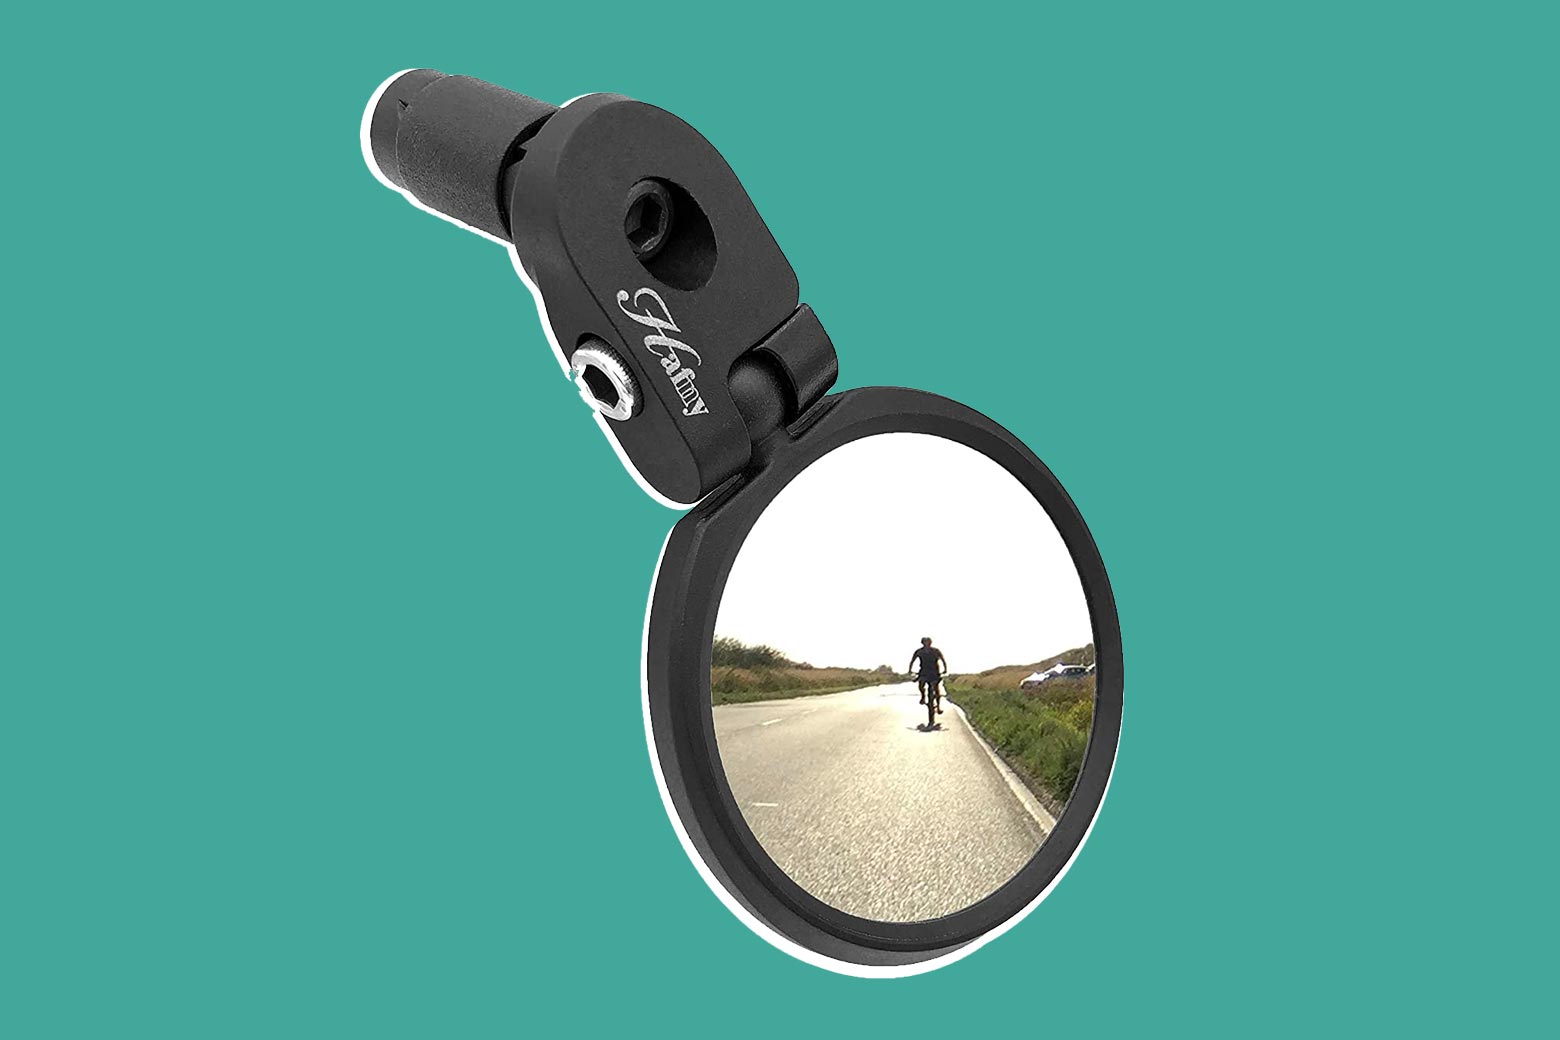 A bike mirror with a biker's reflection in it on a teal background.